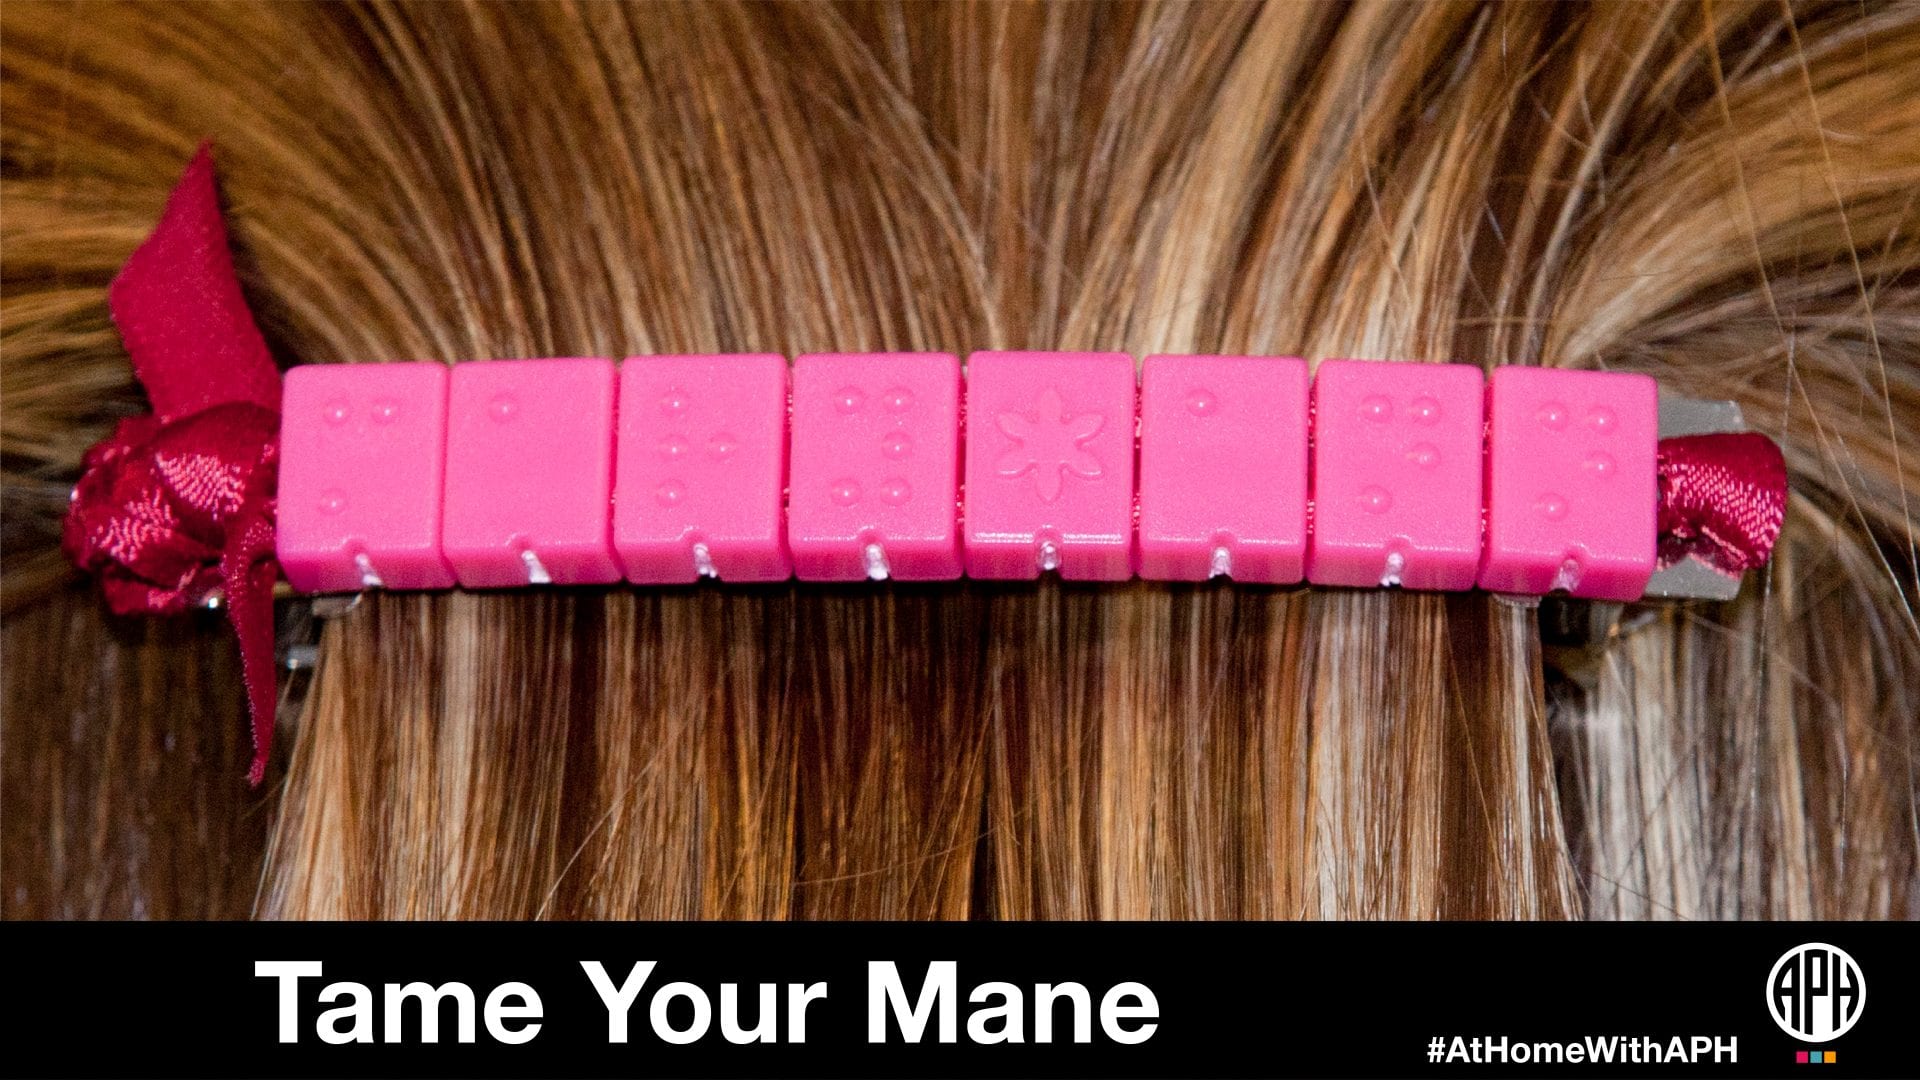 a barrette made of pink braille beads in hair. text reads "tame your mane #AtHomeWithAPH"